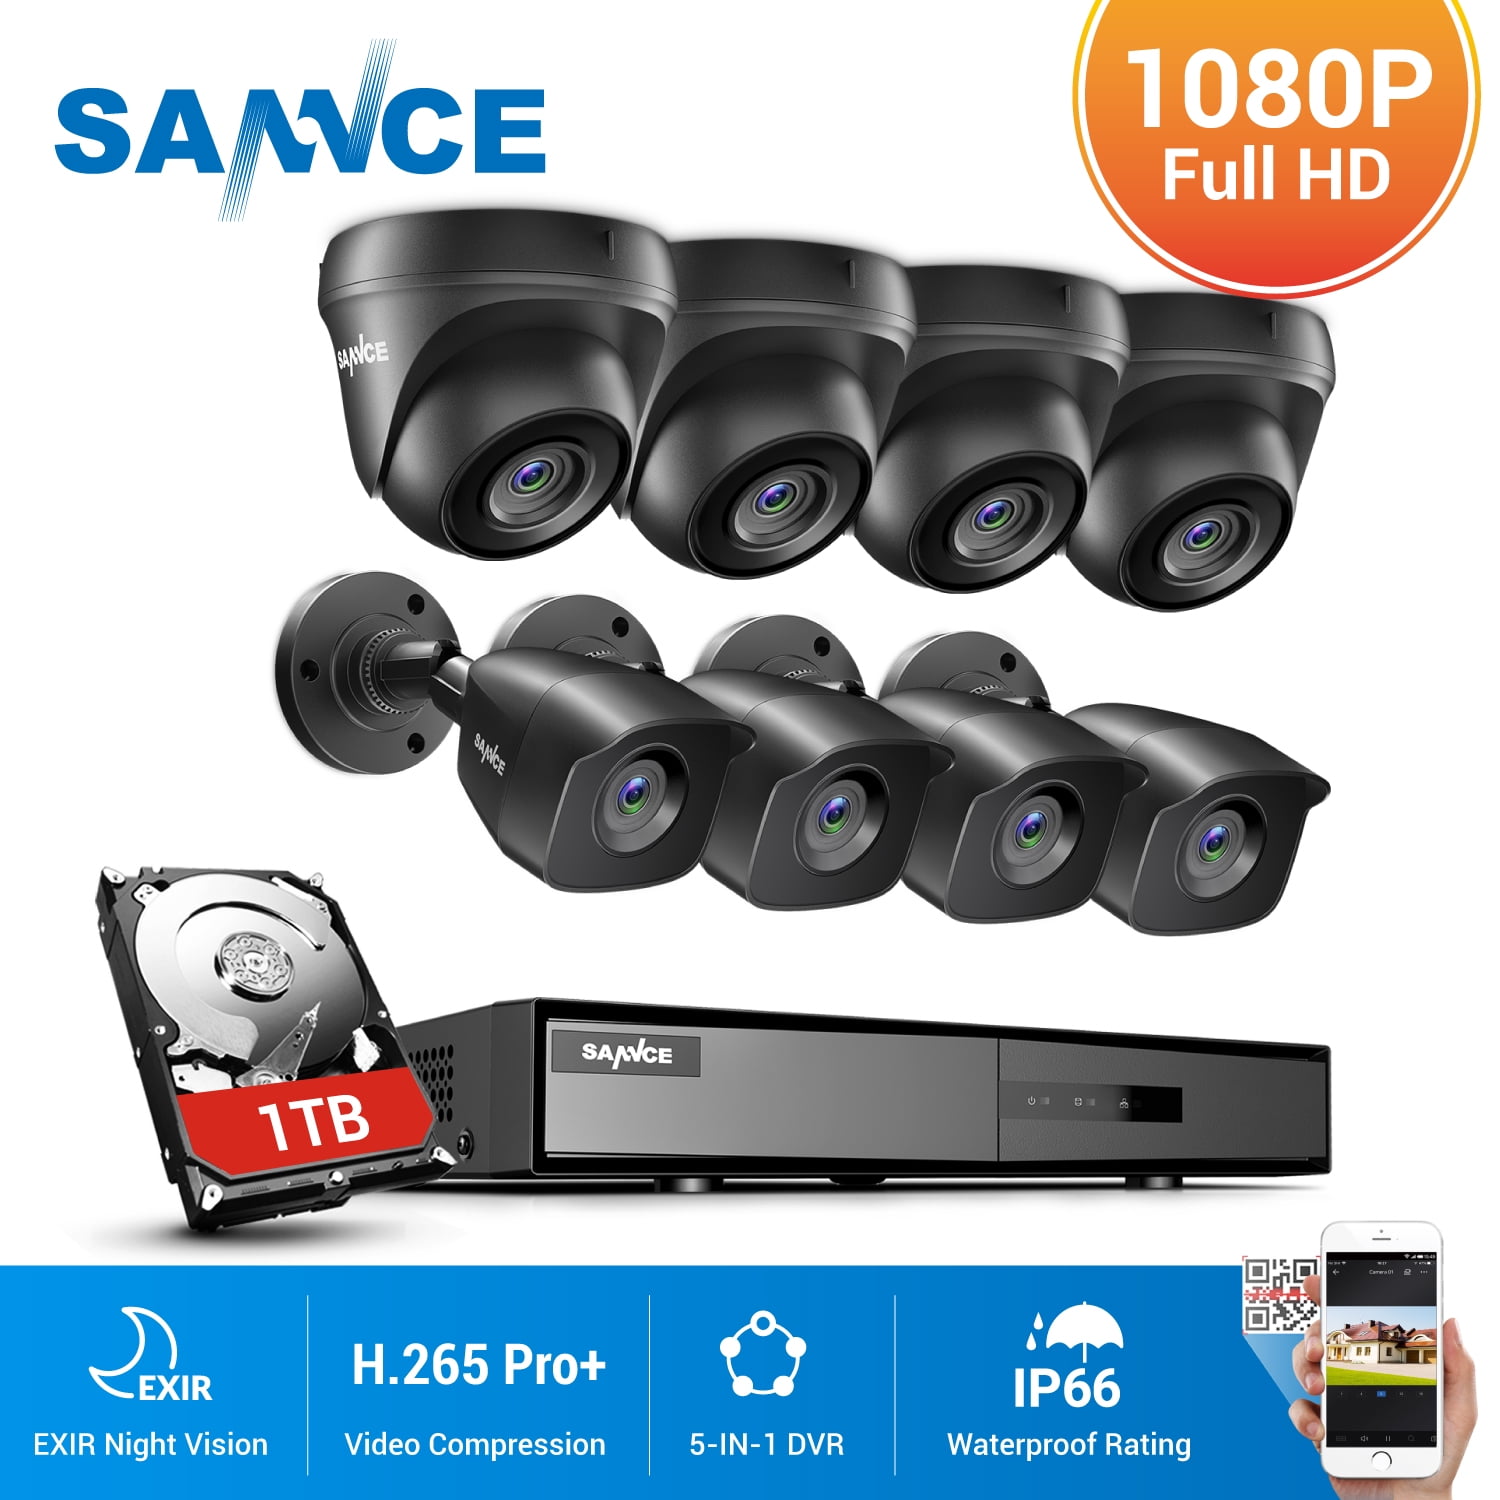 Hikvision 8MP 5MP 1080P CCTV SECURITY SYSTEM 4CH 8CH 5IN1 DVR VIDEO 3000TVL OUTDOOR CAMERA 